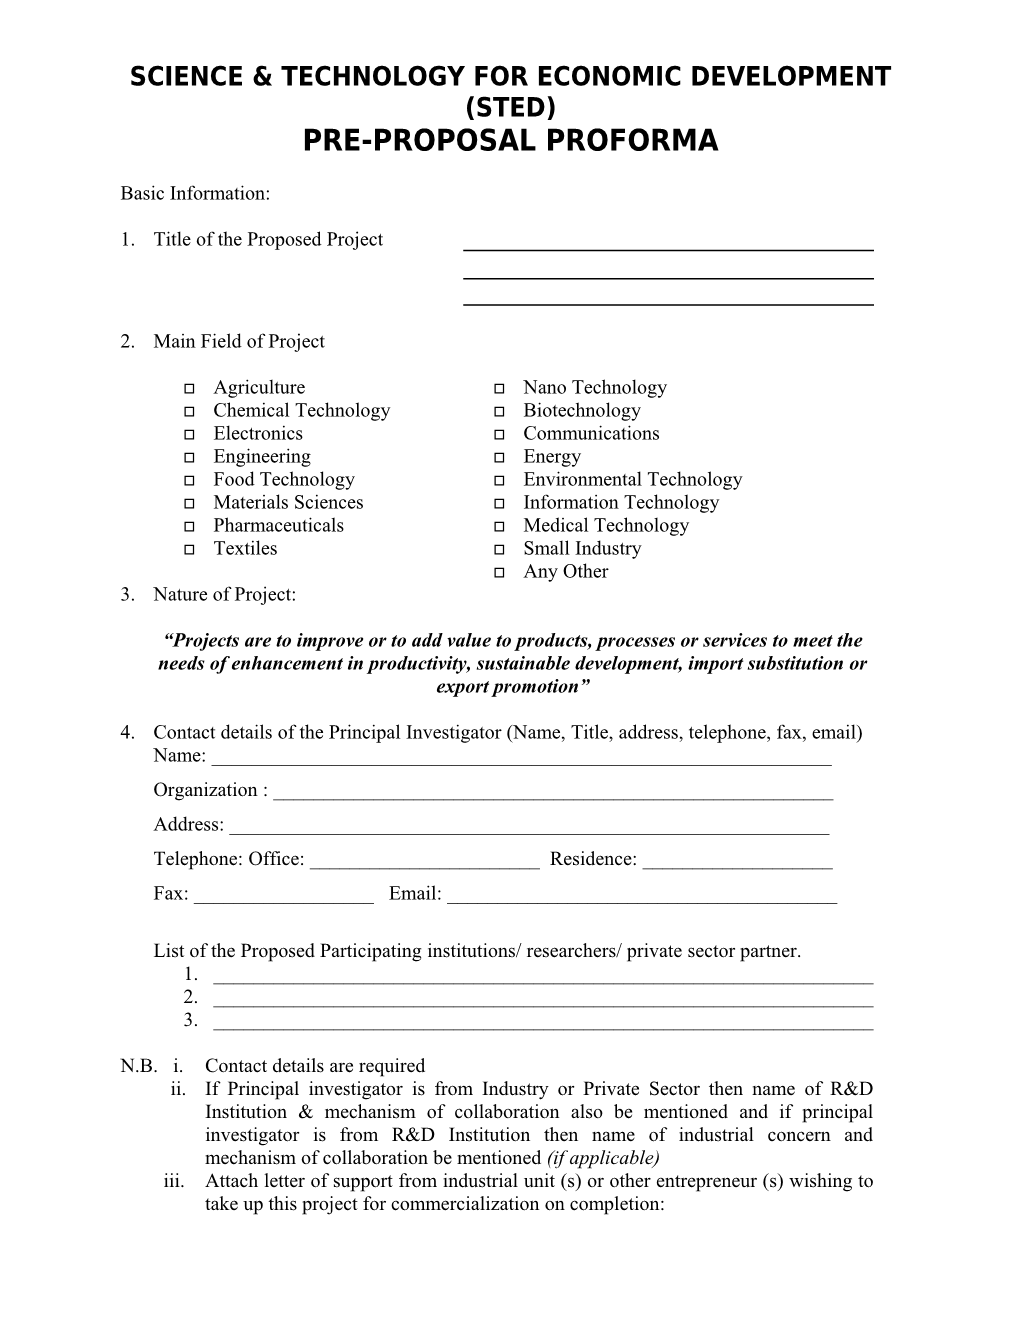 STED Pre-Proposal Proforma of Most